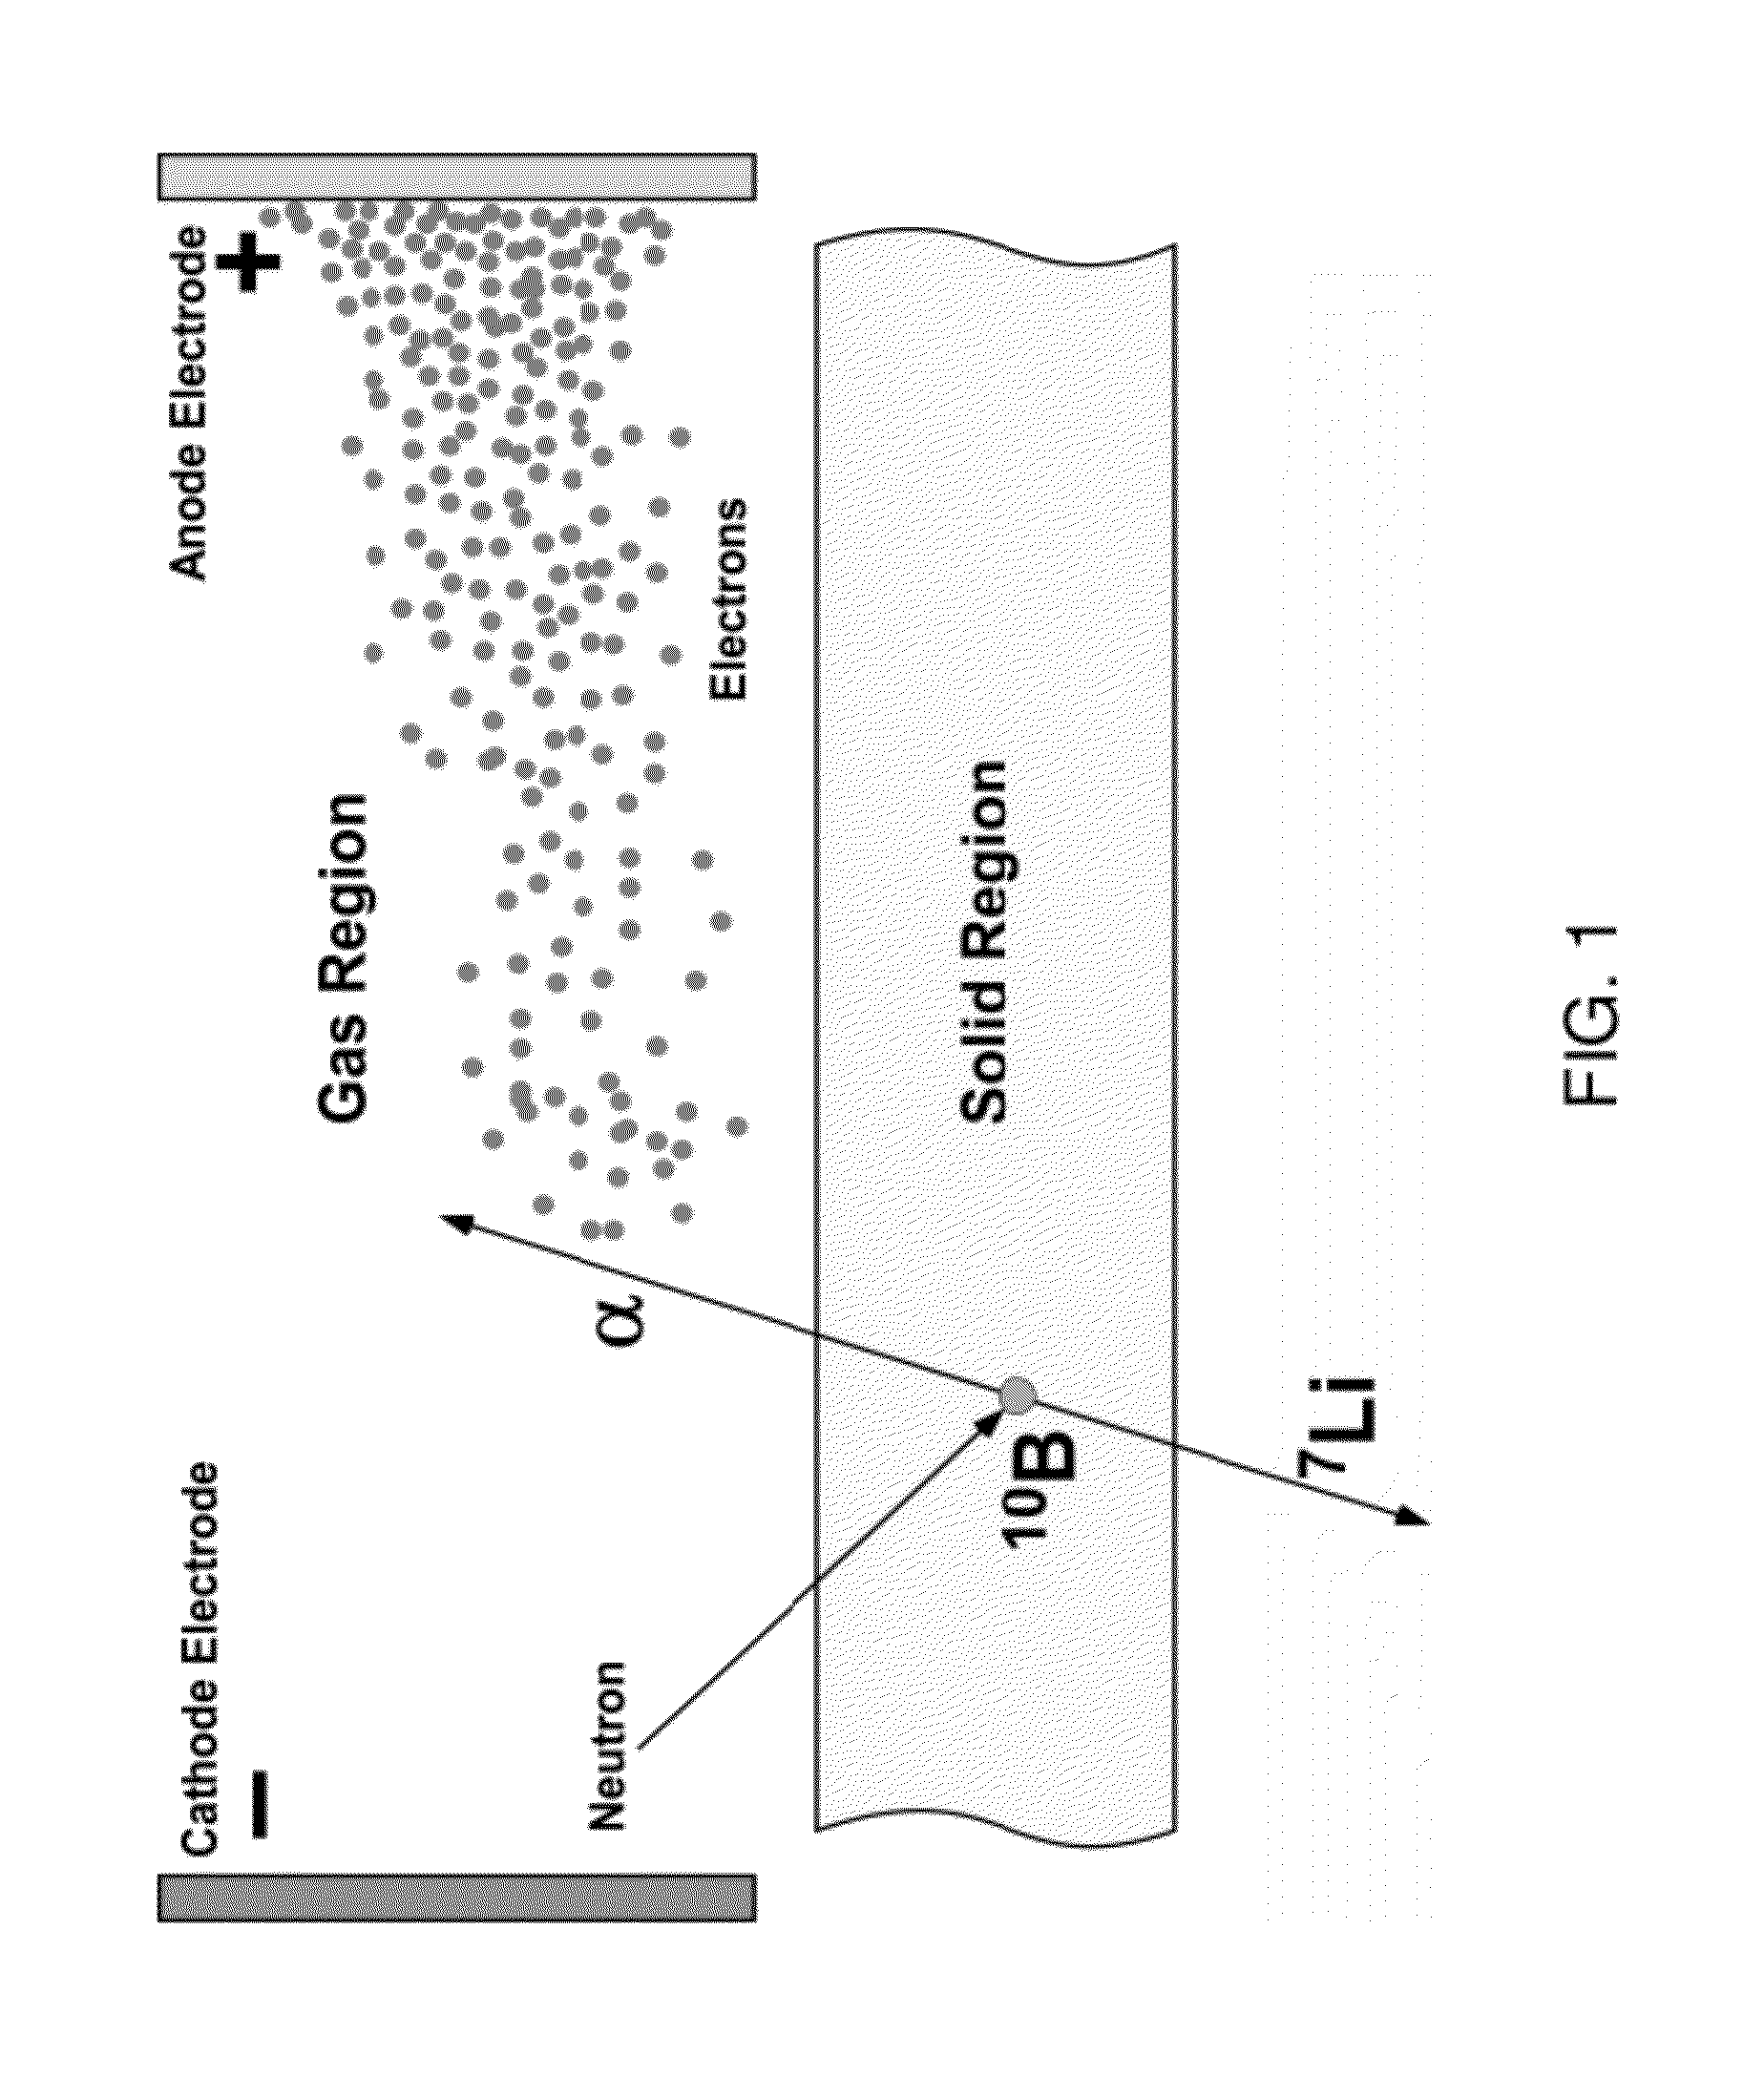 High efficiency proportional neutron detector with solid liner internal structures